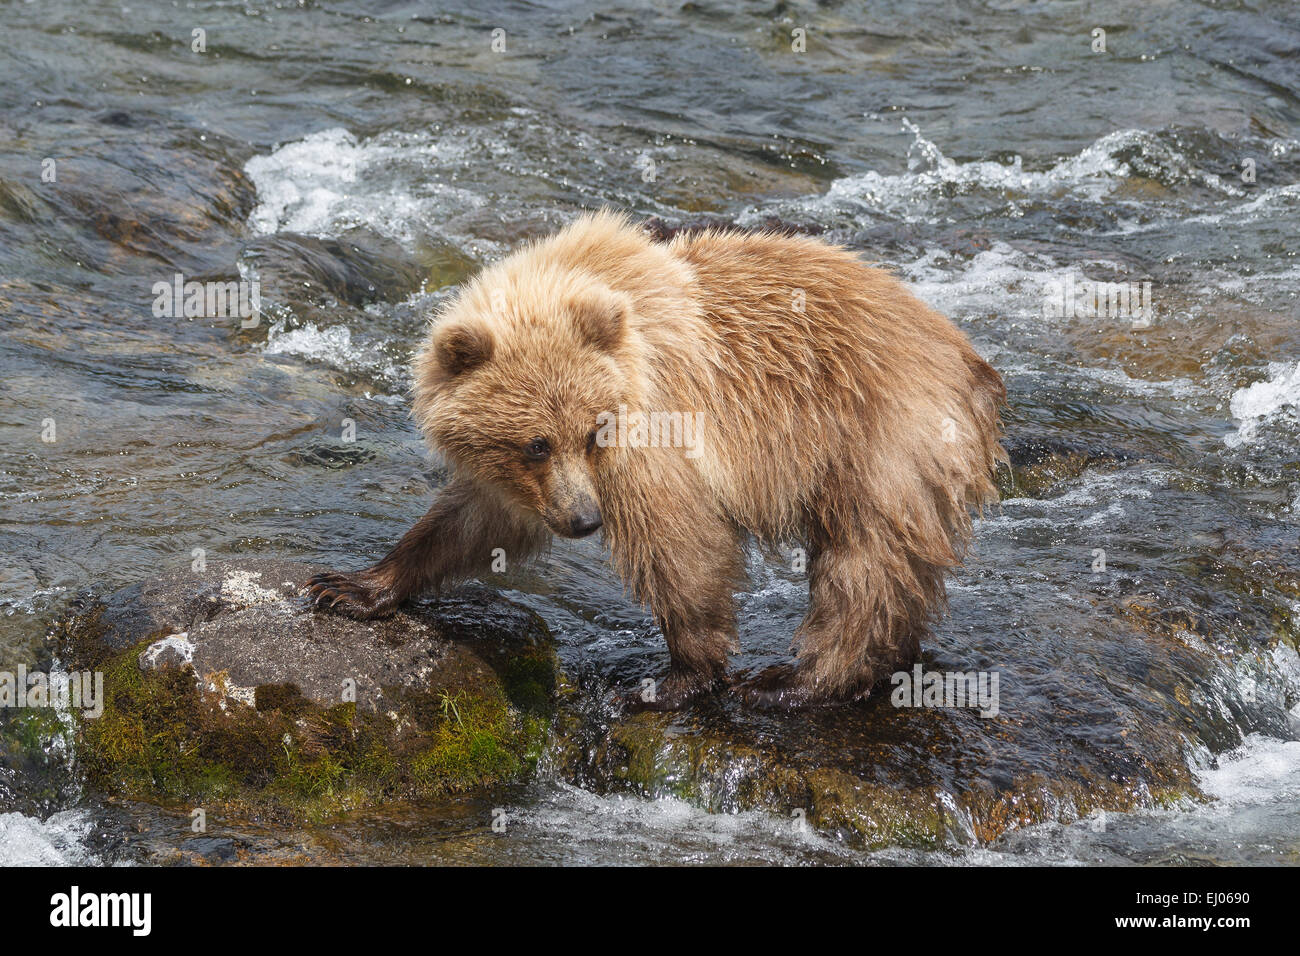 A young brown bear looking for salmon at Brooks River, Katmai National Park, Alaska, United States of America. Stock Photo